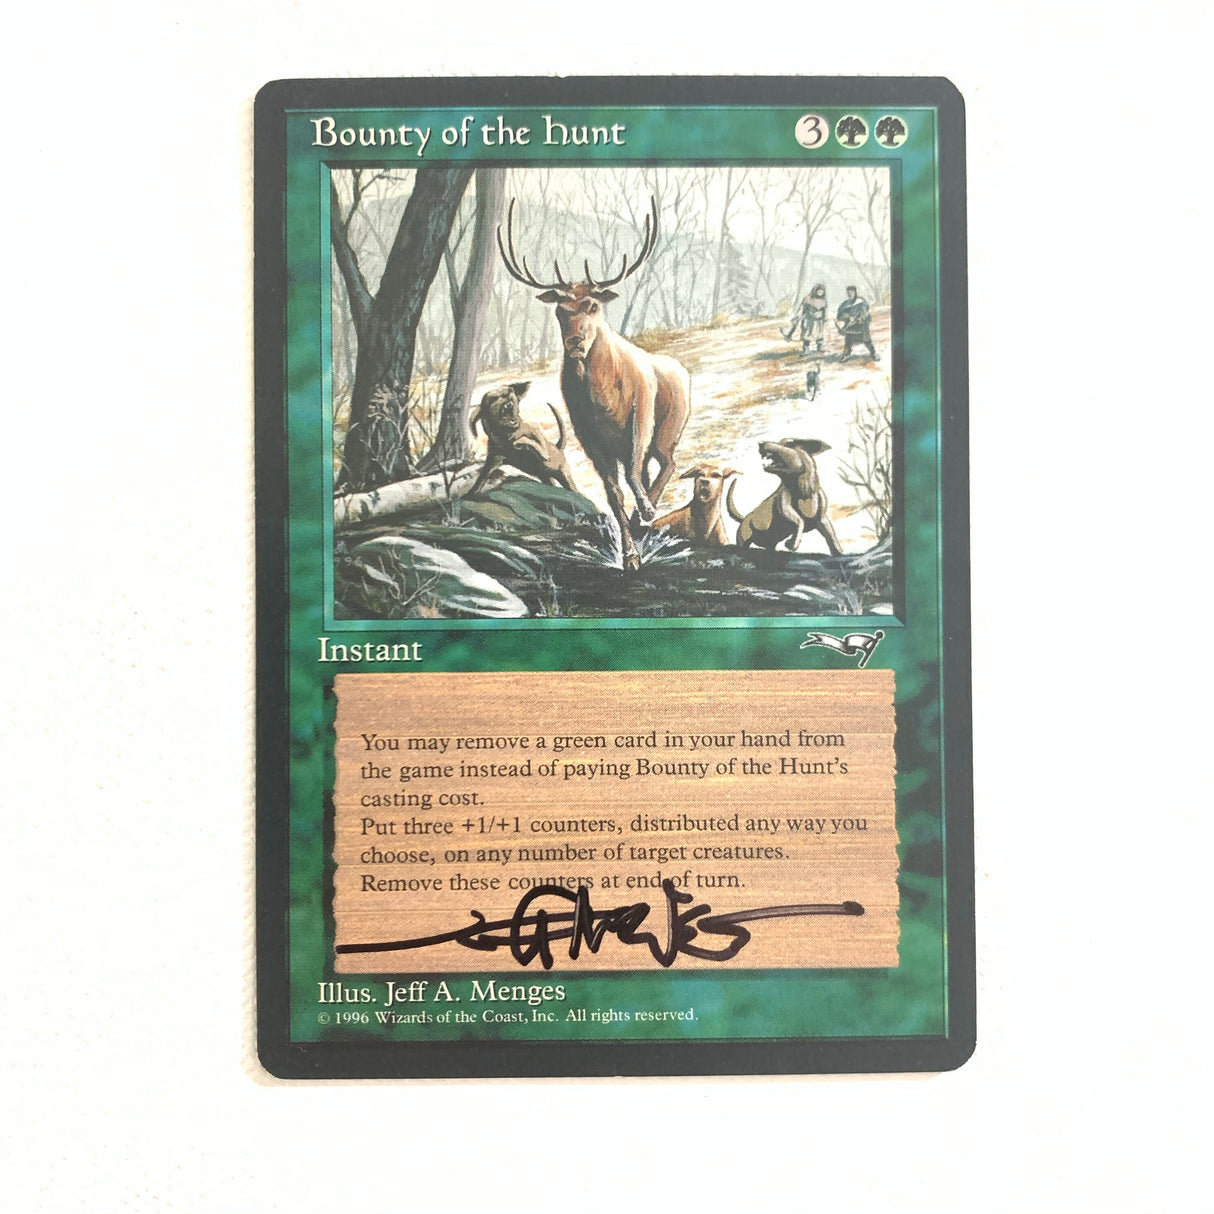 Bounty of the Hunt - [Signed by Jeff A. Menges] Alliances